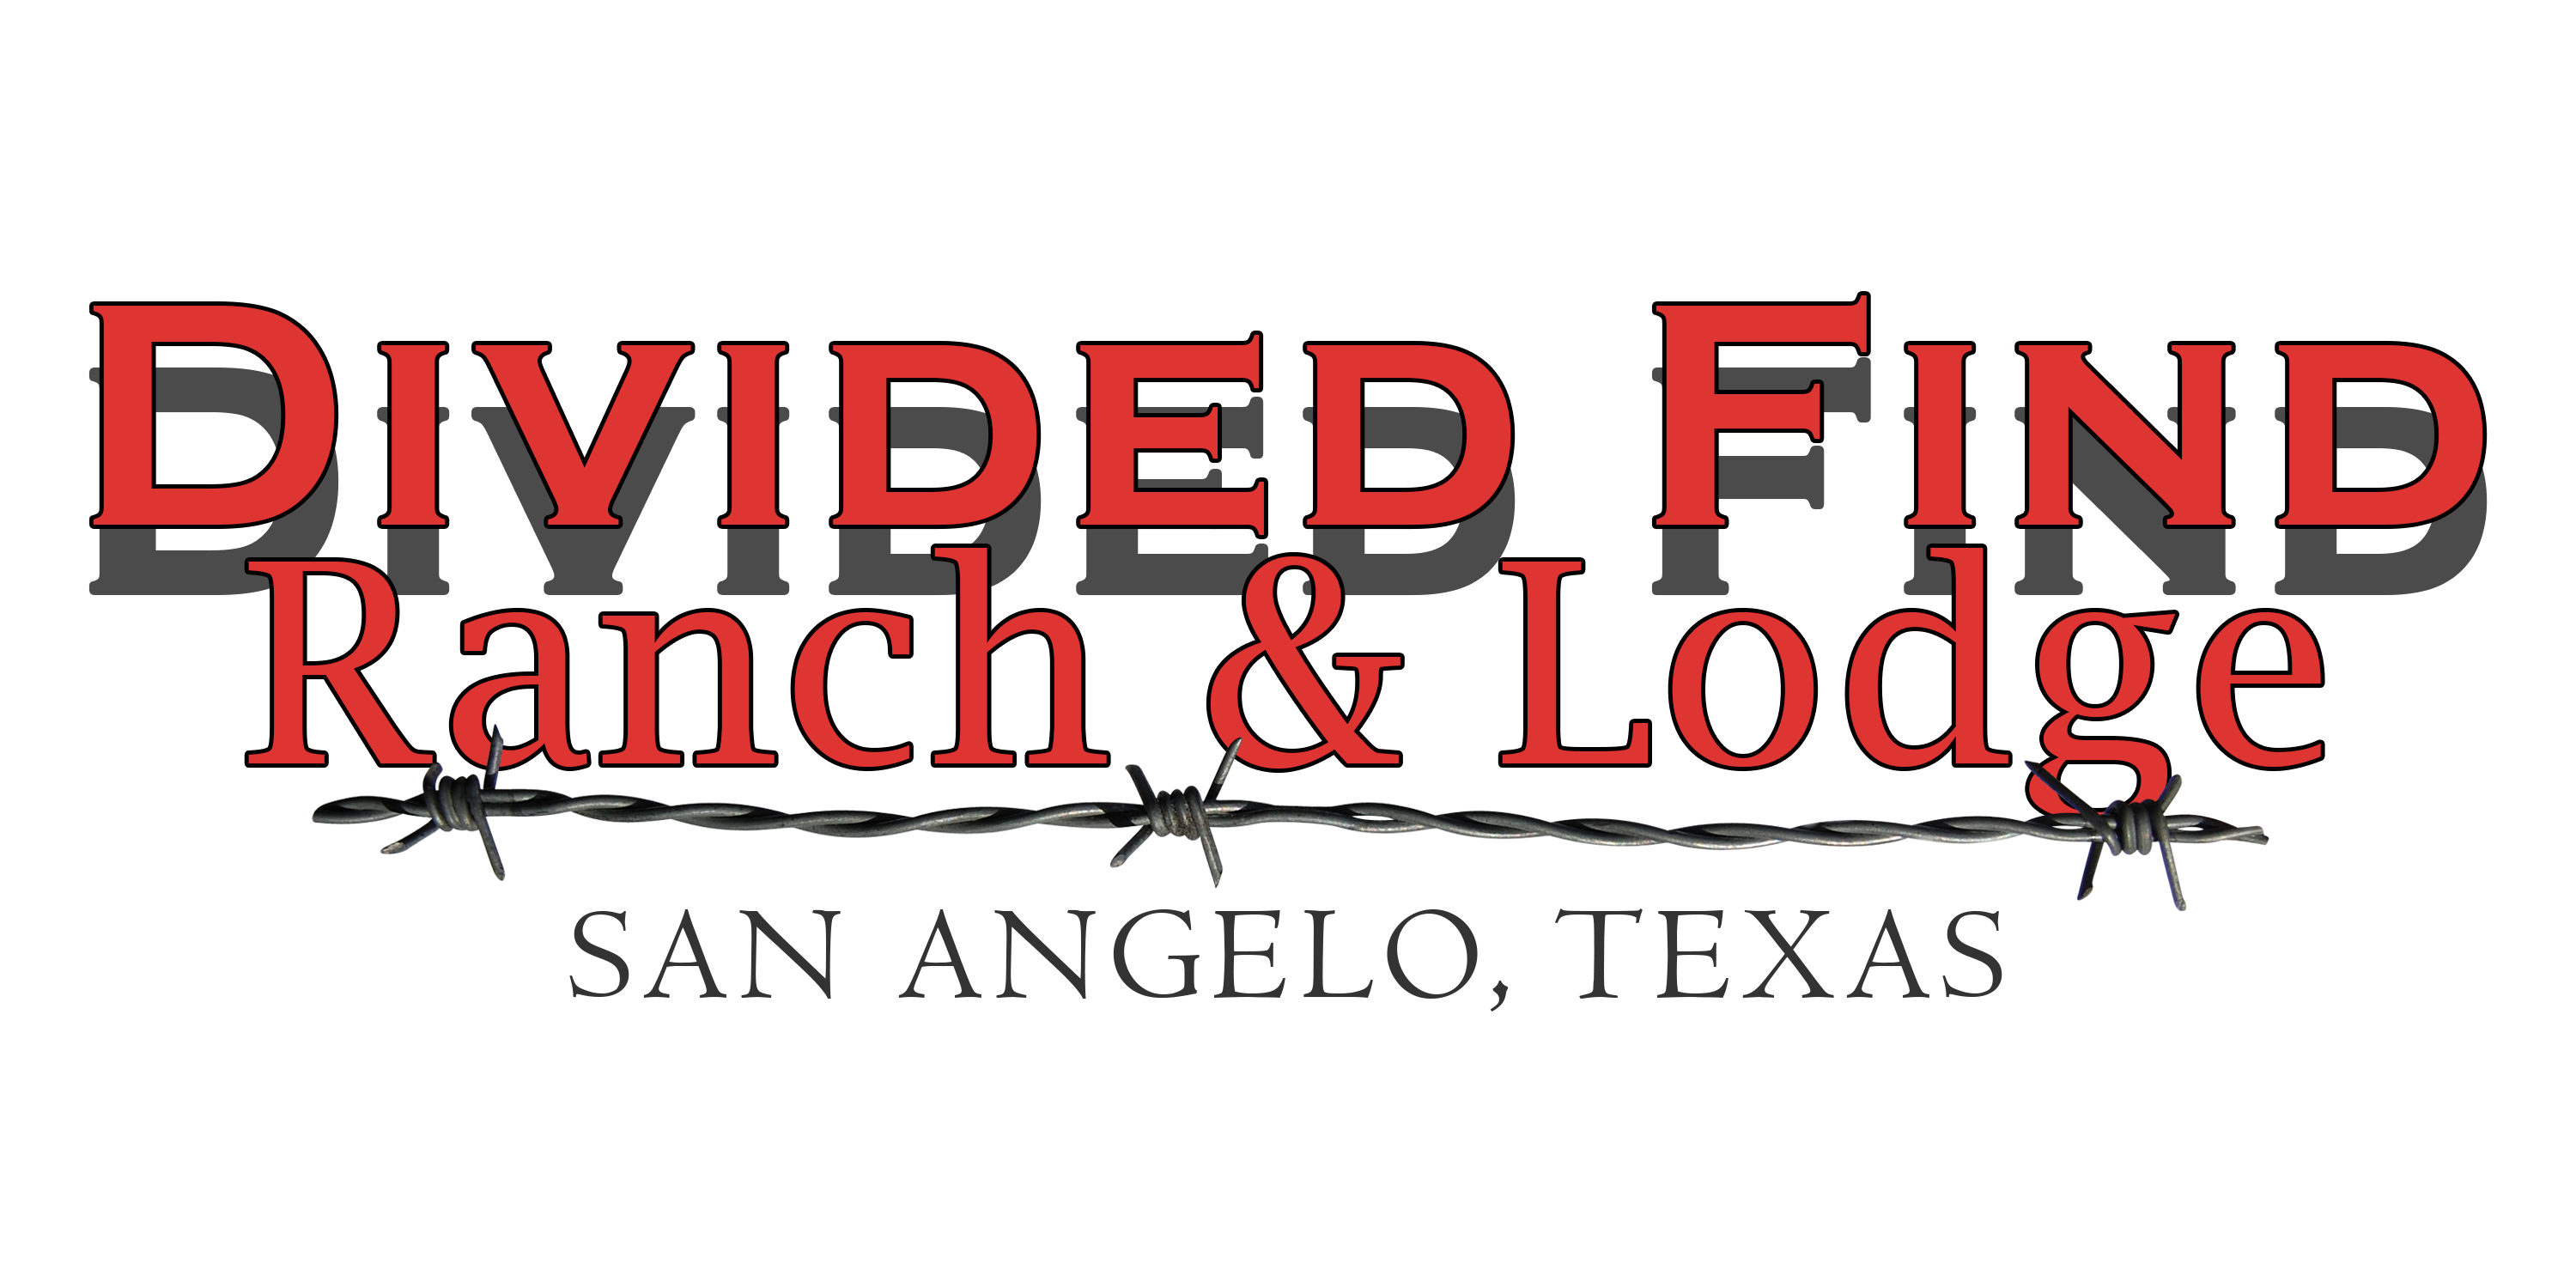 Divided Find Ranch & Lodge